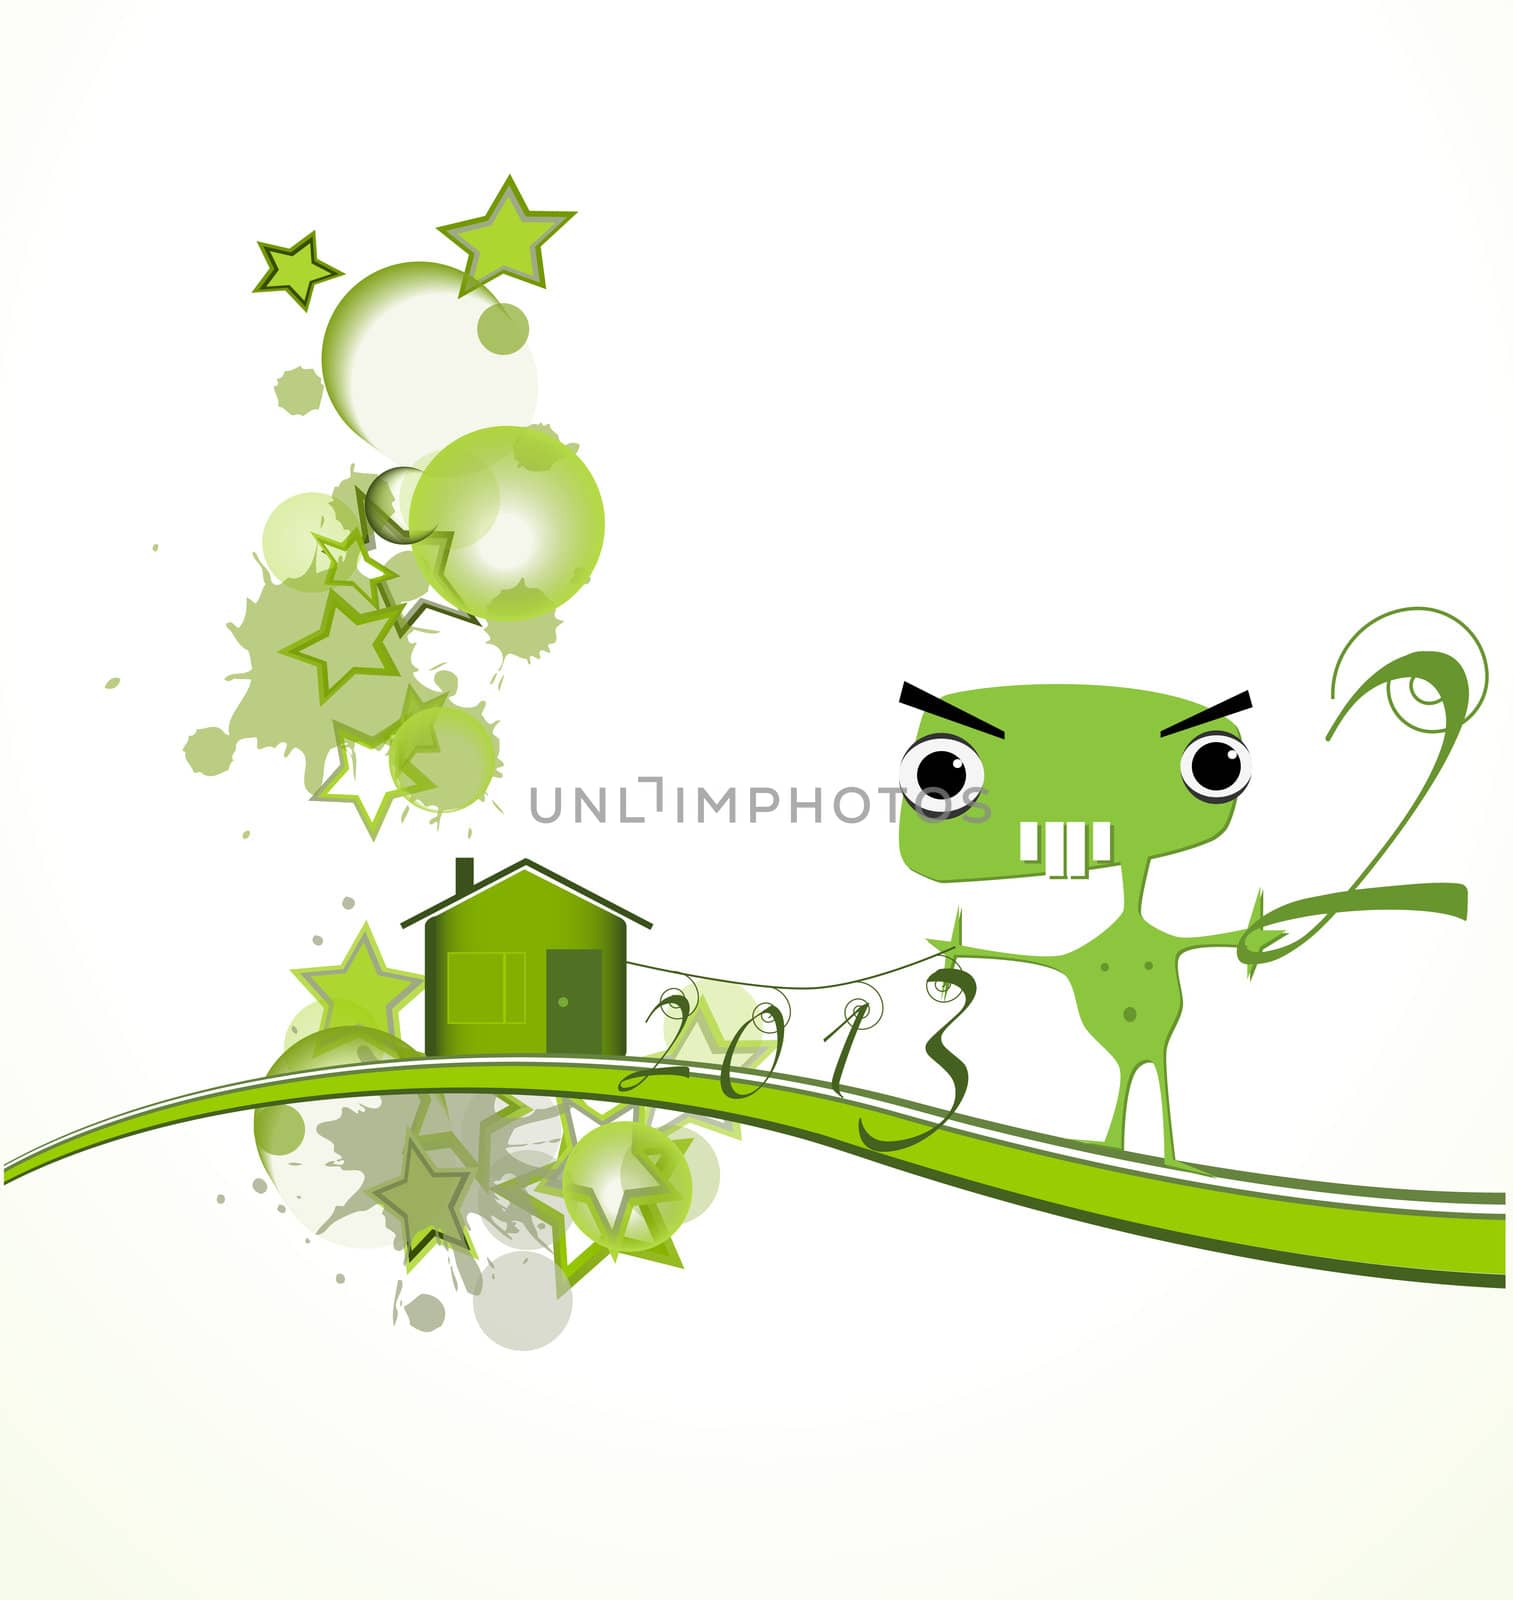 Green house with a monster by Arsen